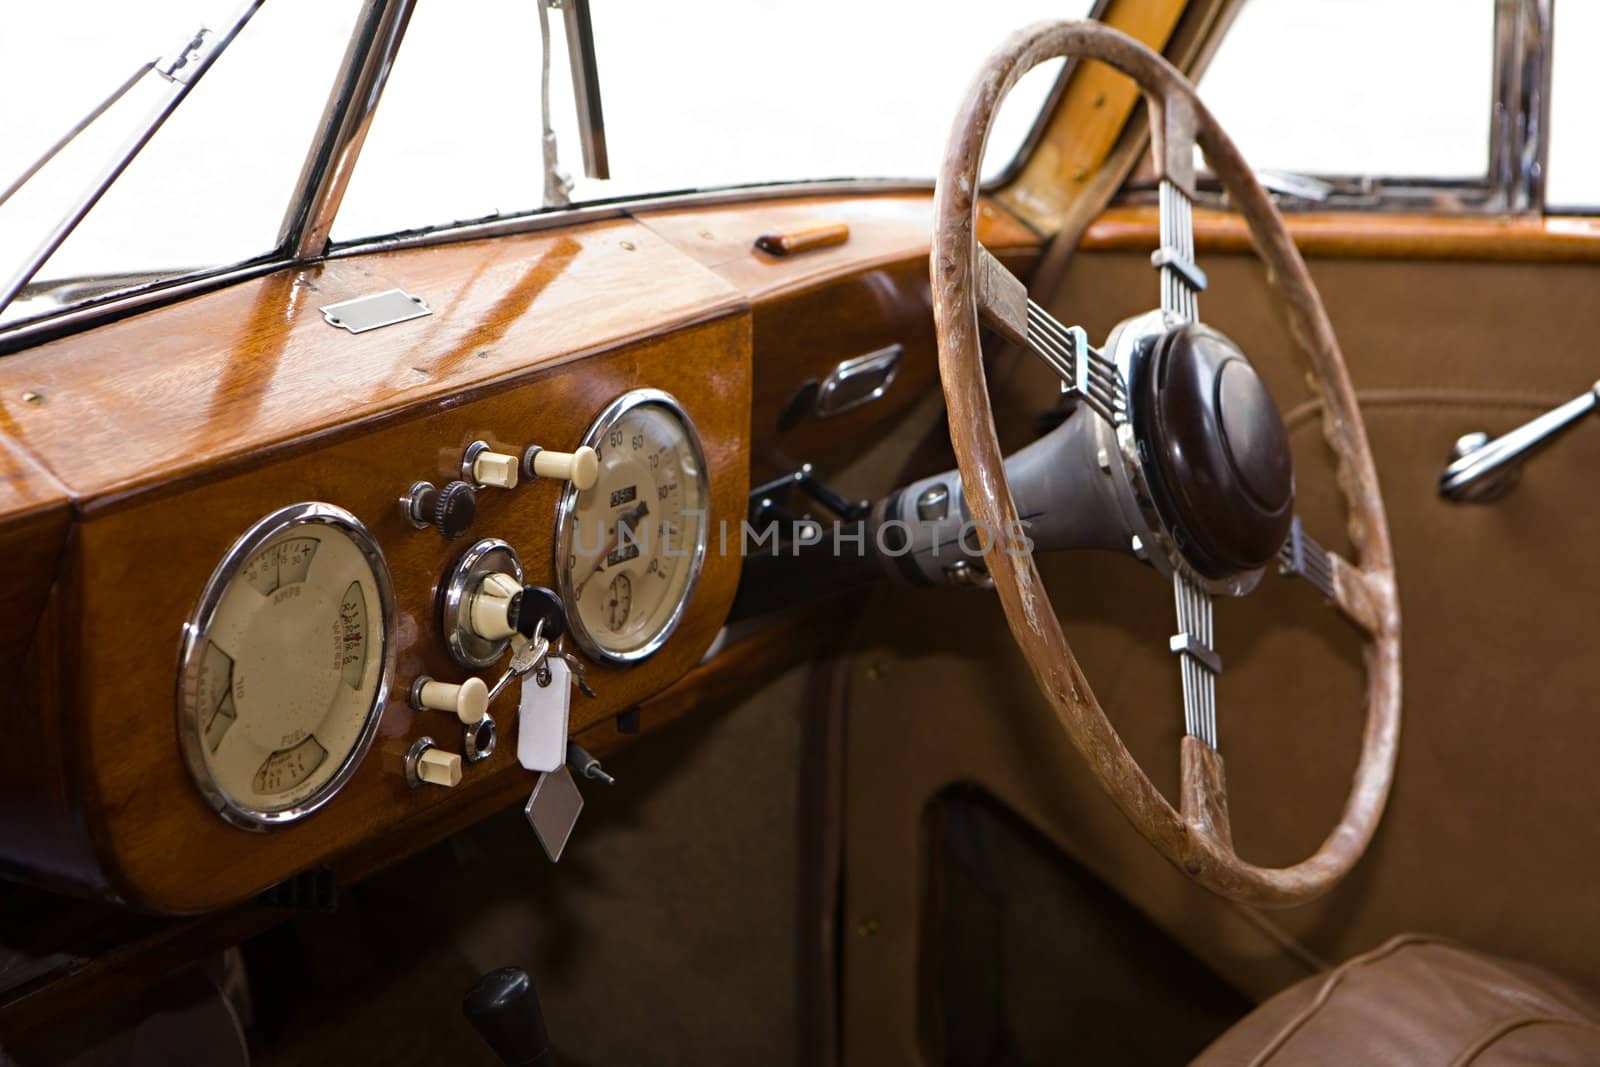 Control panel in the ancient car with a right-hand wheel
